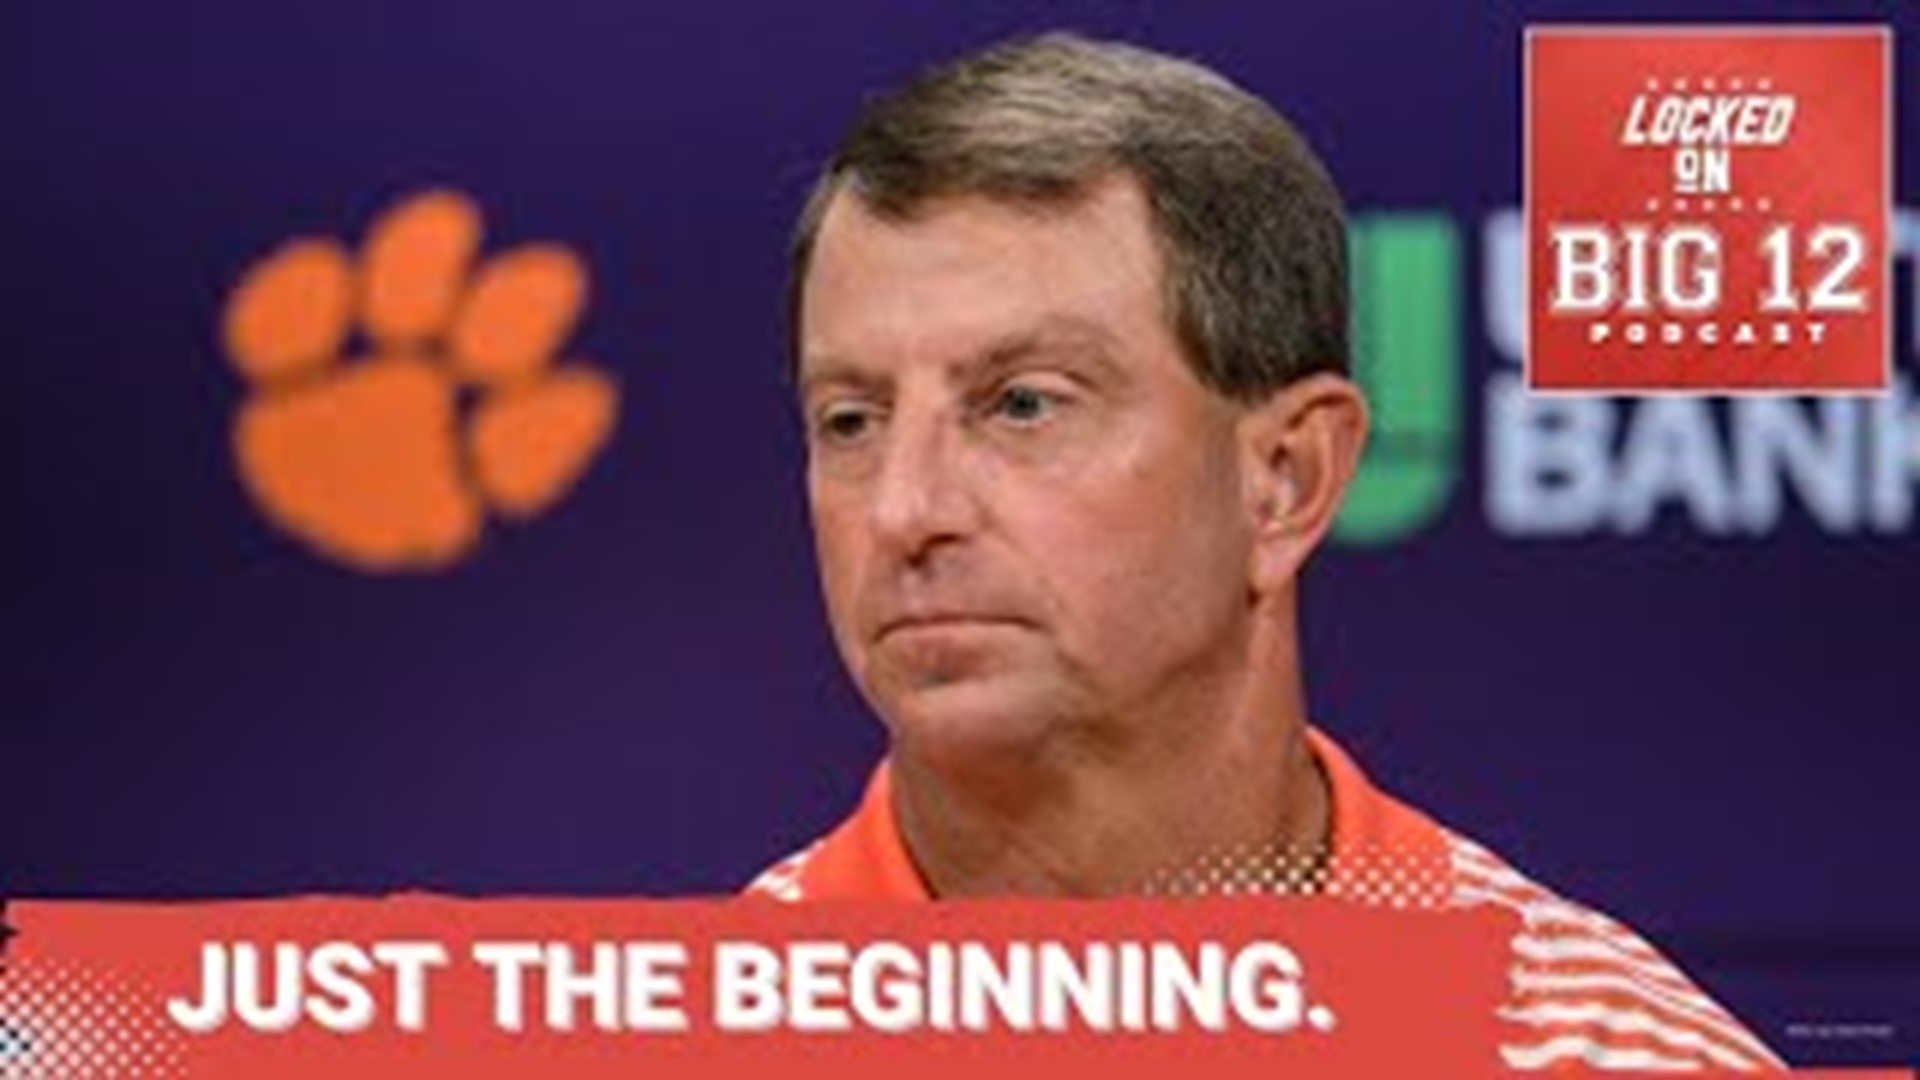 According to ESPN's Pete Thamel, Clemson's legal action against the ACC could usher in a significant transformation in collegiate athletics.